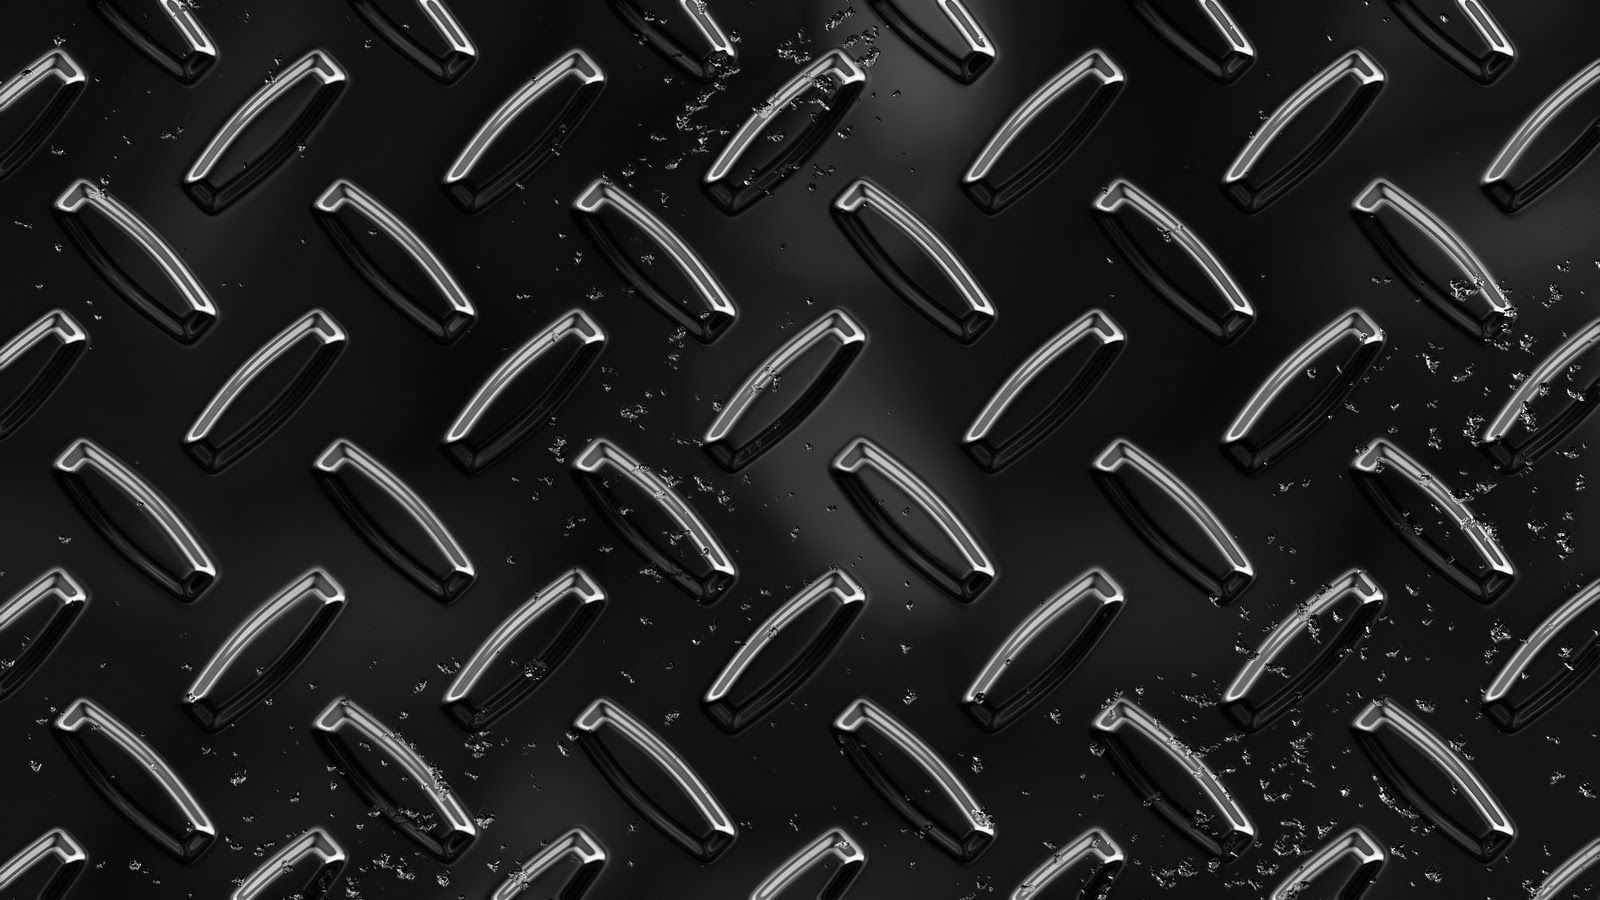 44 Metal HD Wallpapers | Backgrounds - Wallpaper Abyss